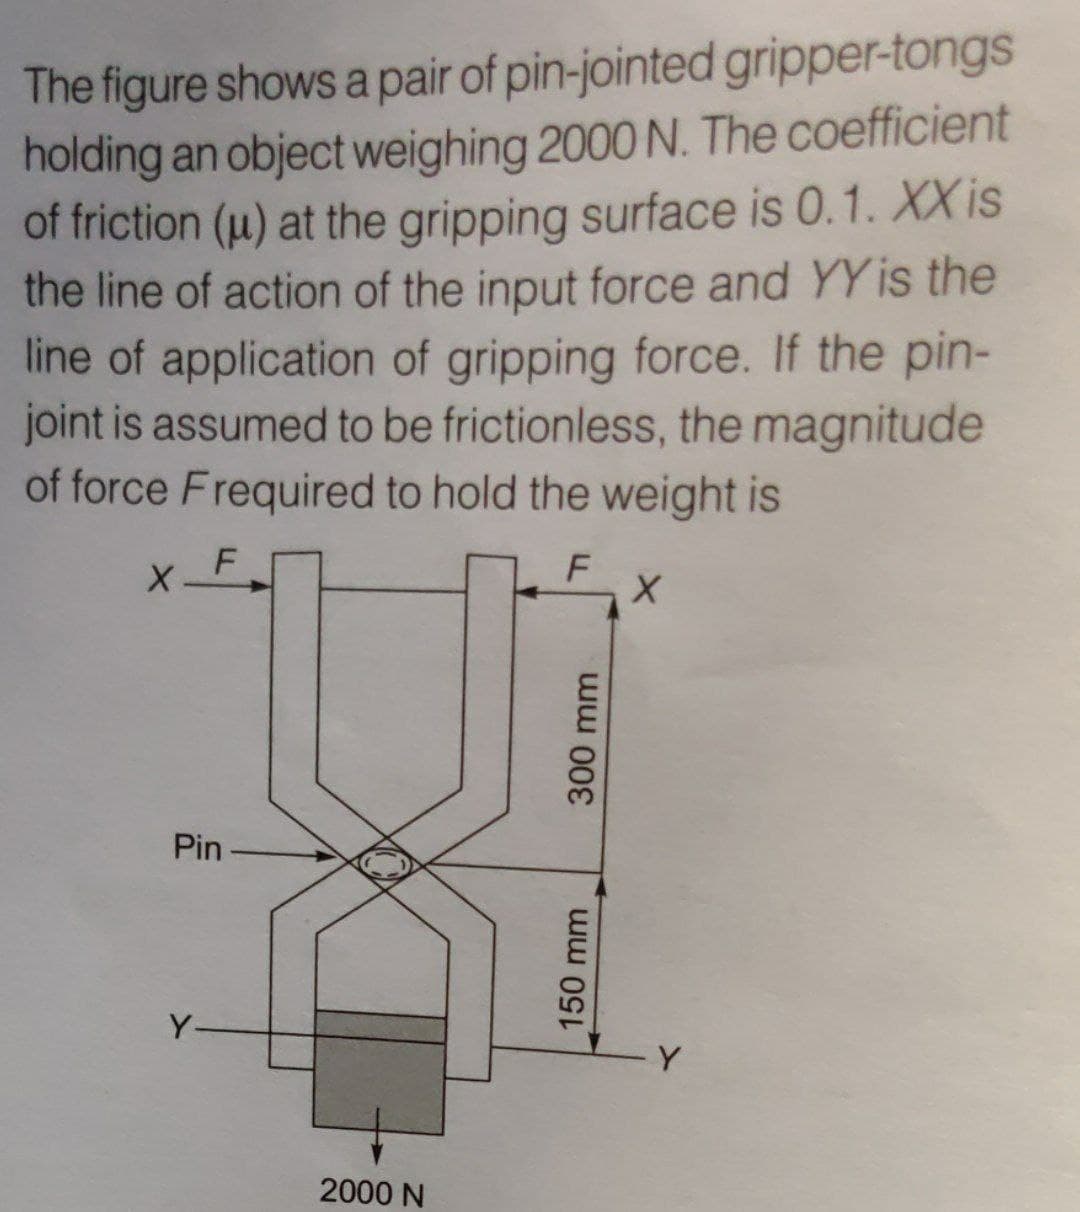 The figure shows a pair of pin-jointed gripper-tongs
holding an object weighing 2000 N. The coefficient
of friction (u) at the gripping surface is 0.1. XX is
the line of action of the input force and YY is the
line of application of gripping force. If the pin-
joint is assumed to be frictionless, the magnitude
of force Frequired to hold the weight is
F
Pin
Y-
2000 N
150mm
ww 00
